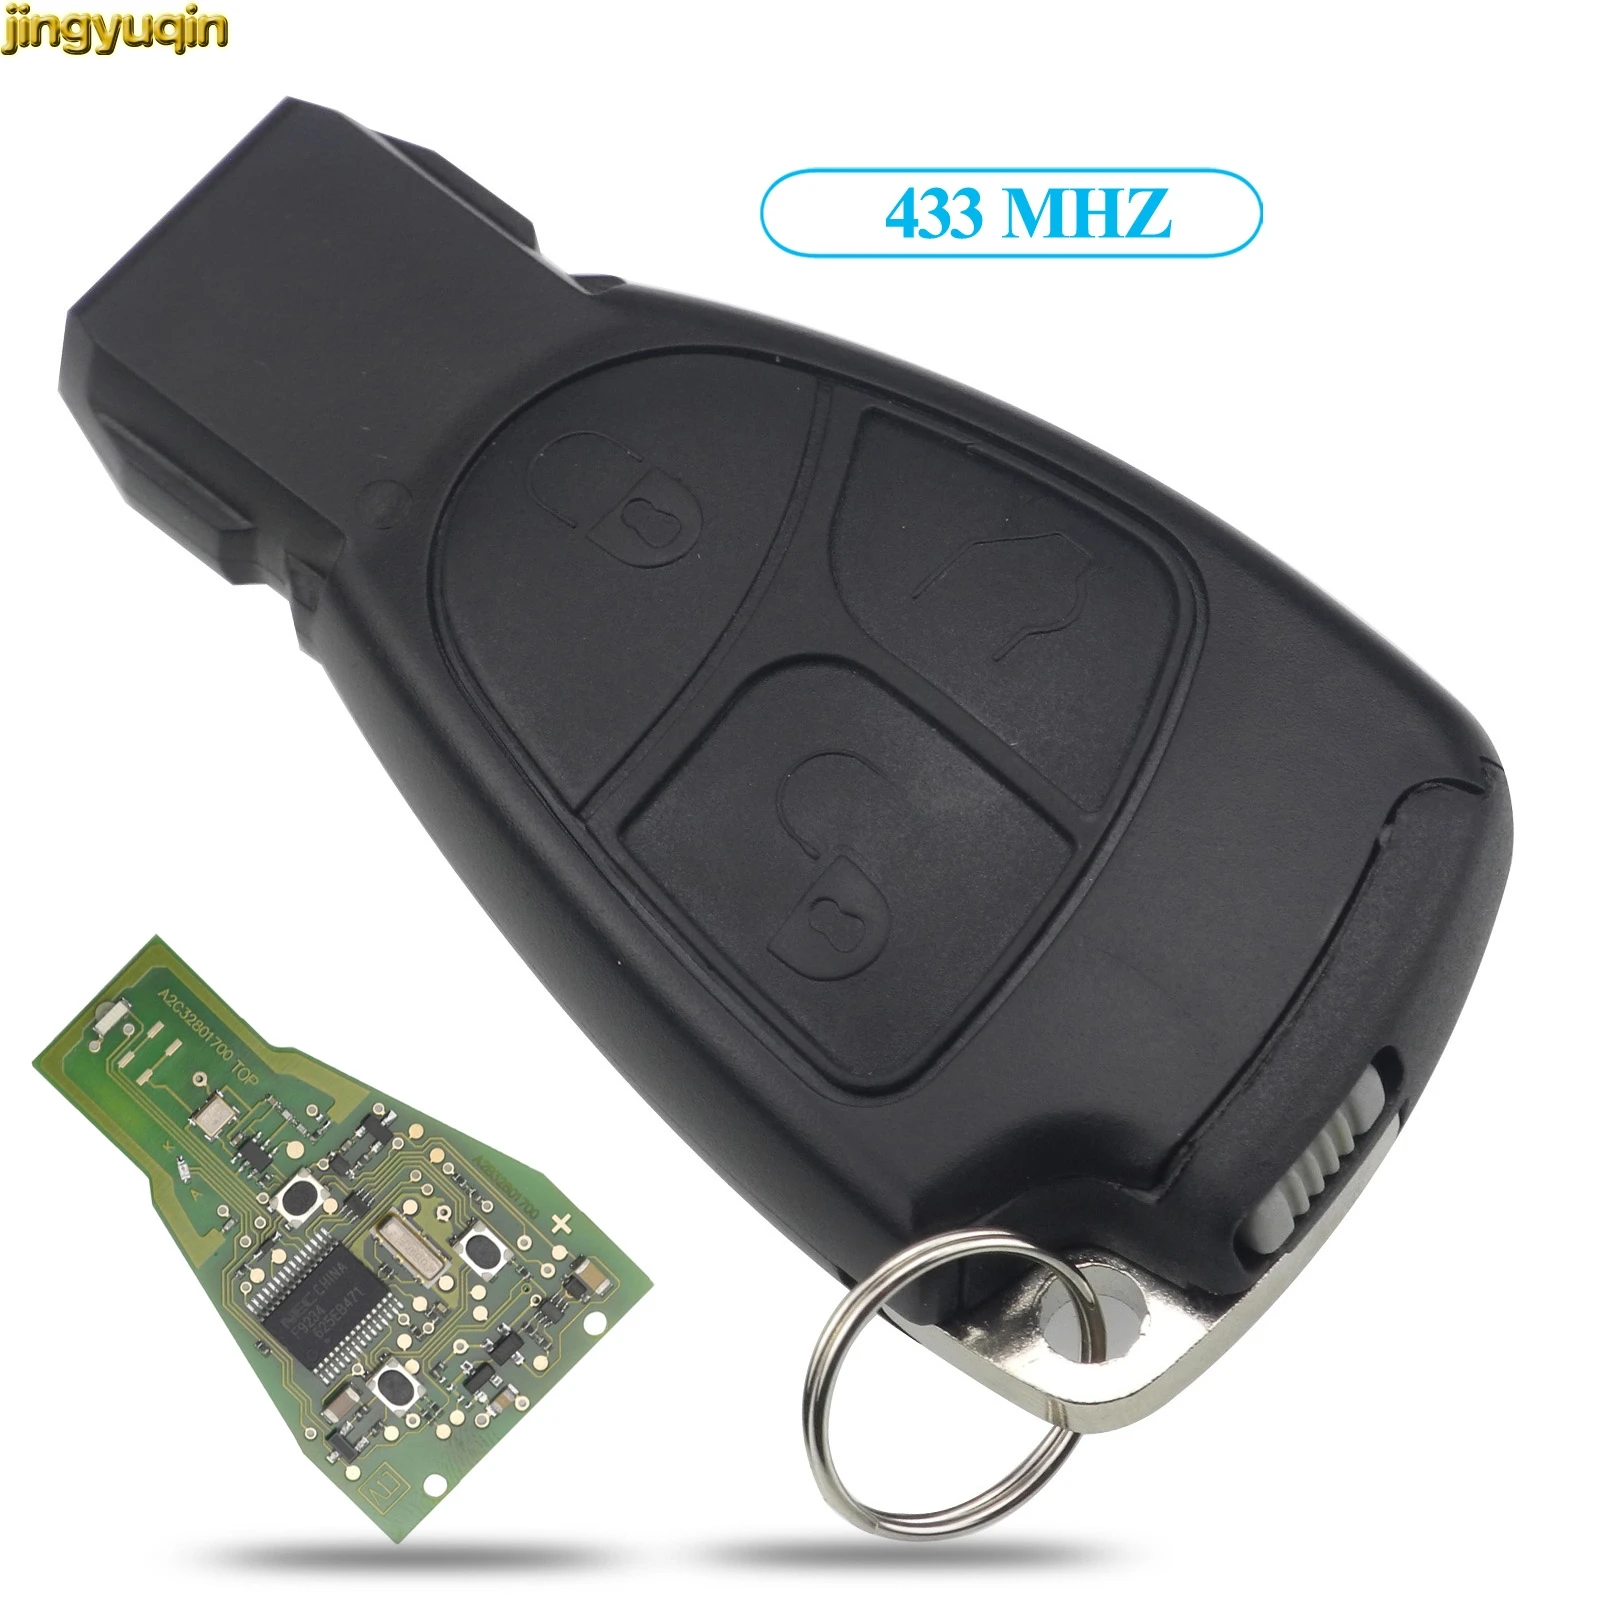 

Jingyuqin Smart Car Key 433MHZ + Chip For Mercedes Benz B C E ML S CLK CL 2/3 Buttons Remote Circuit Board FOB Styling